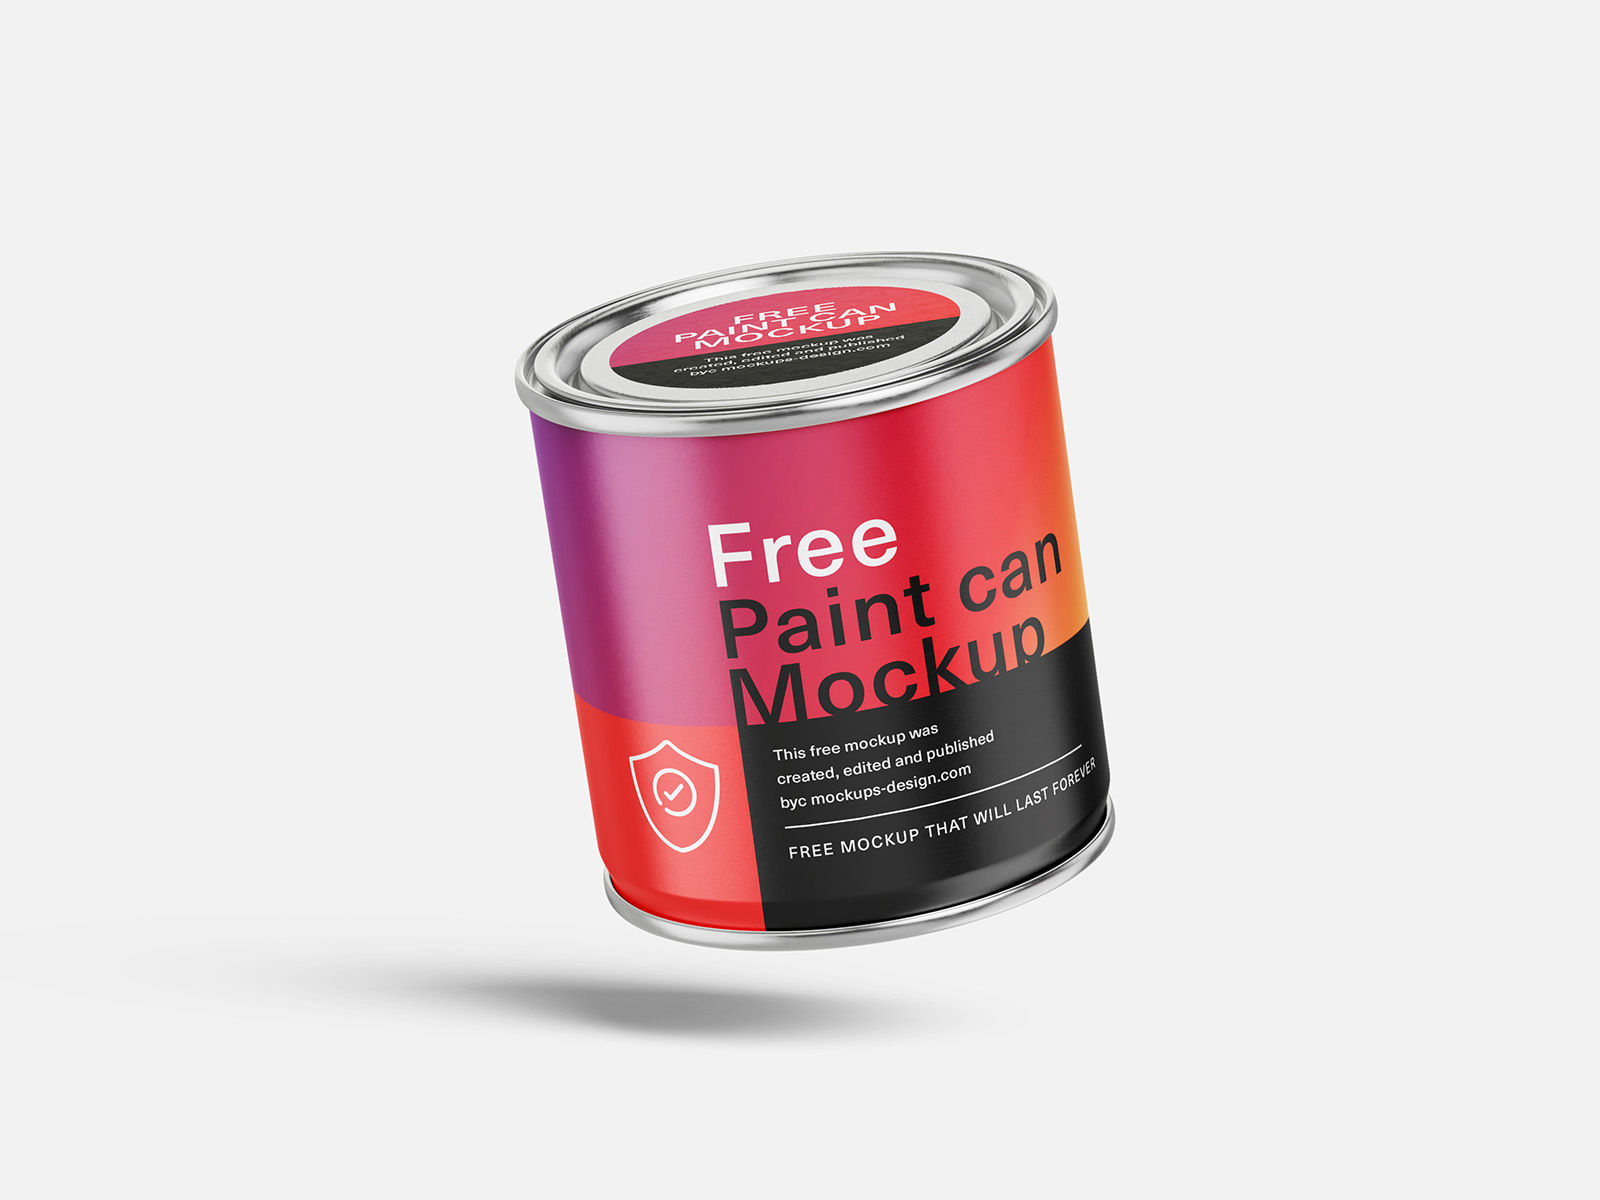 Free paint can mockup